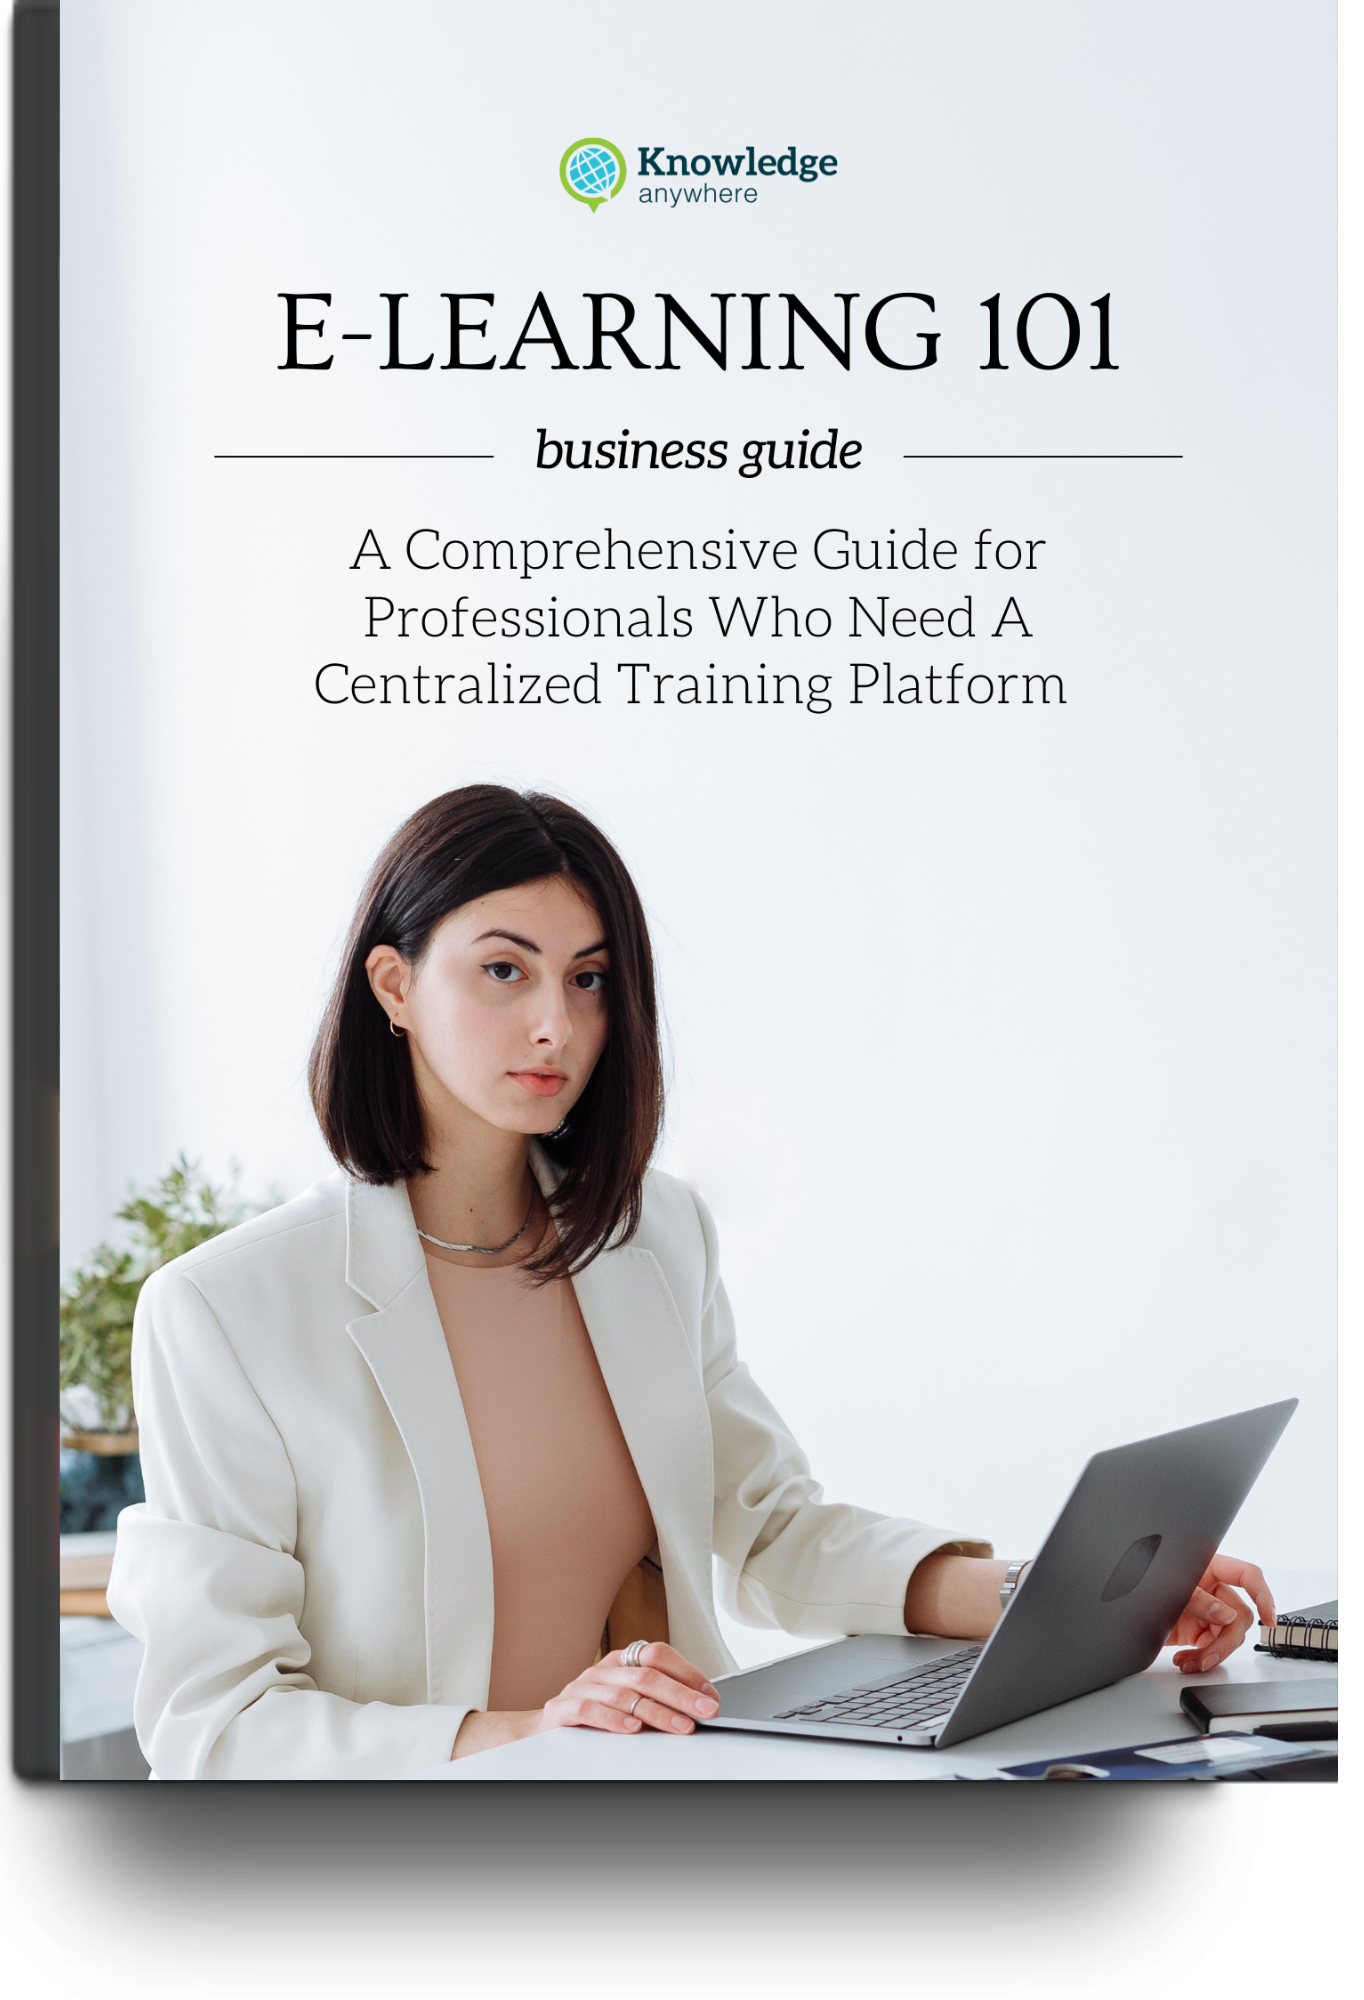 eLearning 101: A Comprehensive Guide for Professionals Who Need A Centralized Training Platform